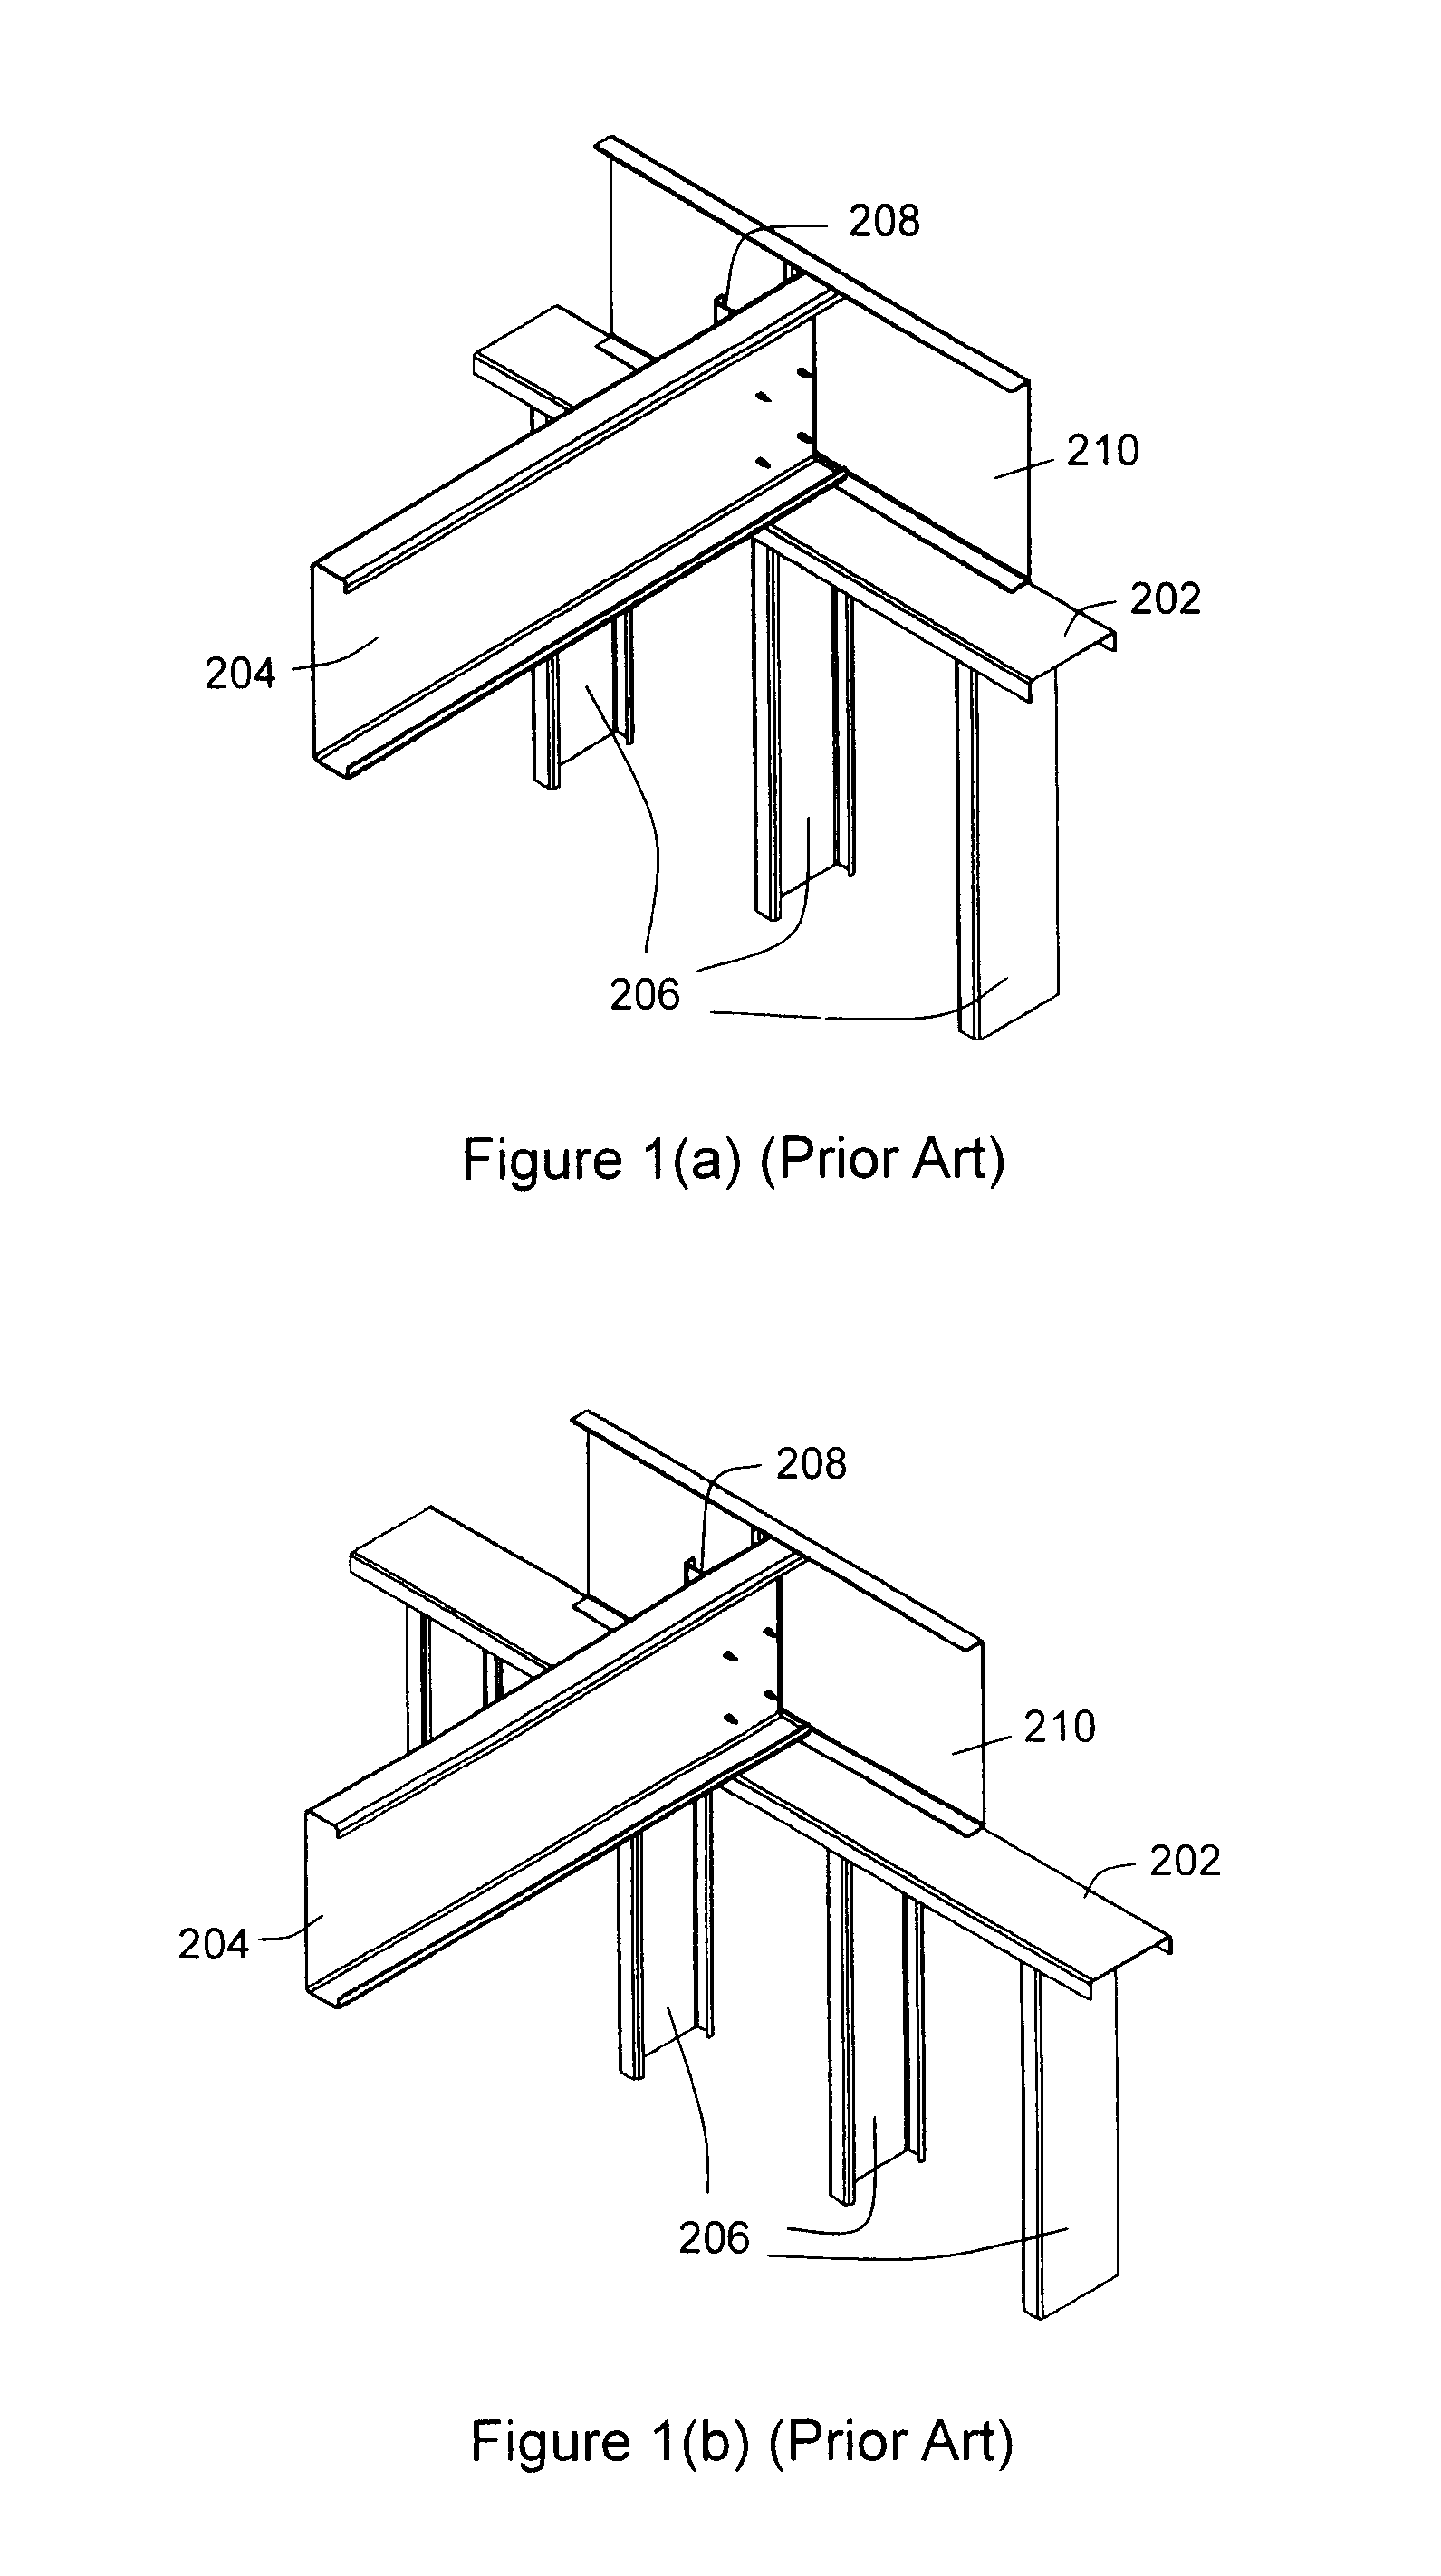 Adjustable floor to wall connectors for use with bottom chord and web bearing joists